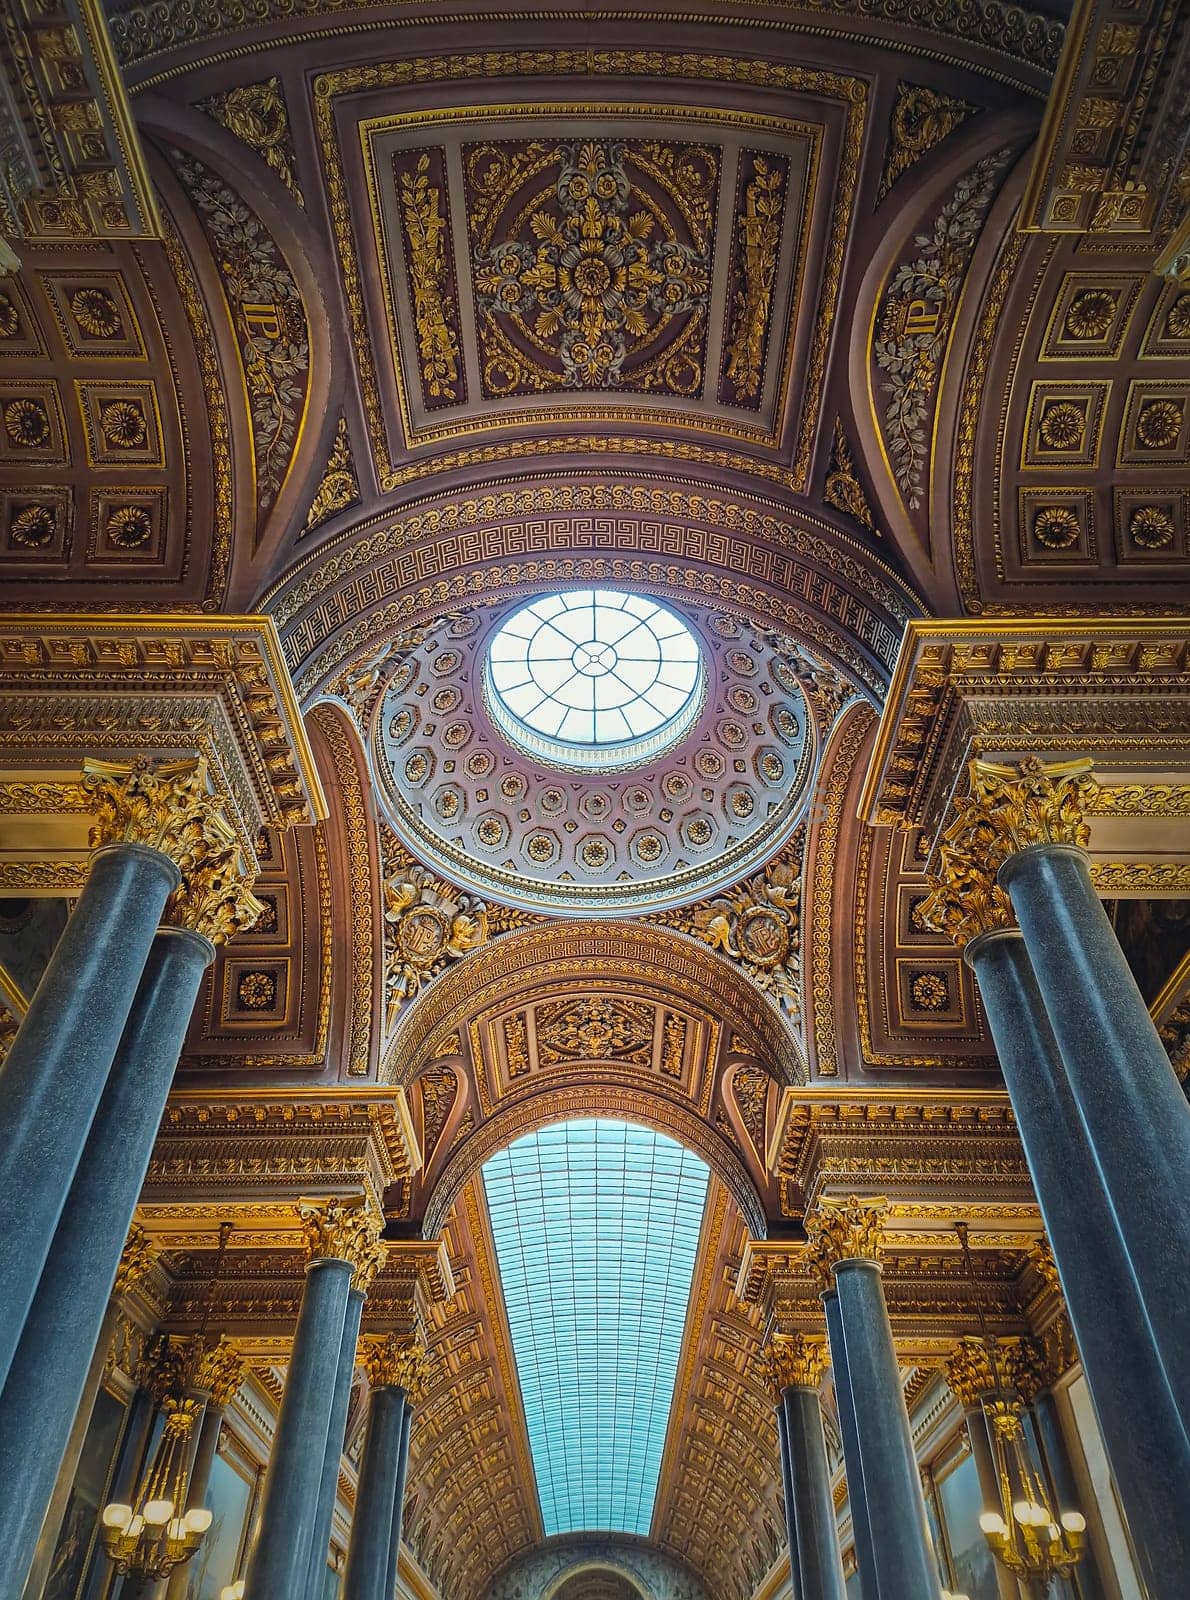 Achitectural details with the glass ceiling and golden ornaments inside the Versailles palace hall, Gallery of Great Battles, the largest room in the castle of the sun king Louis XIV by psychoshadow